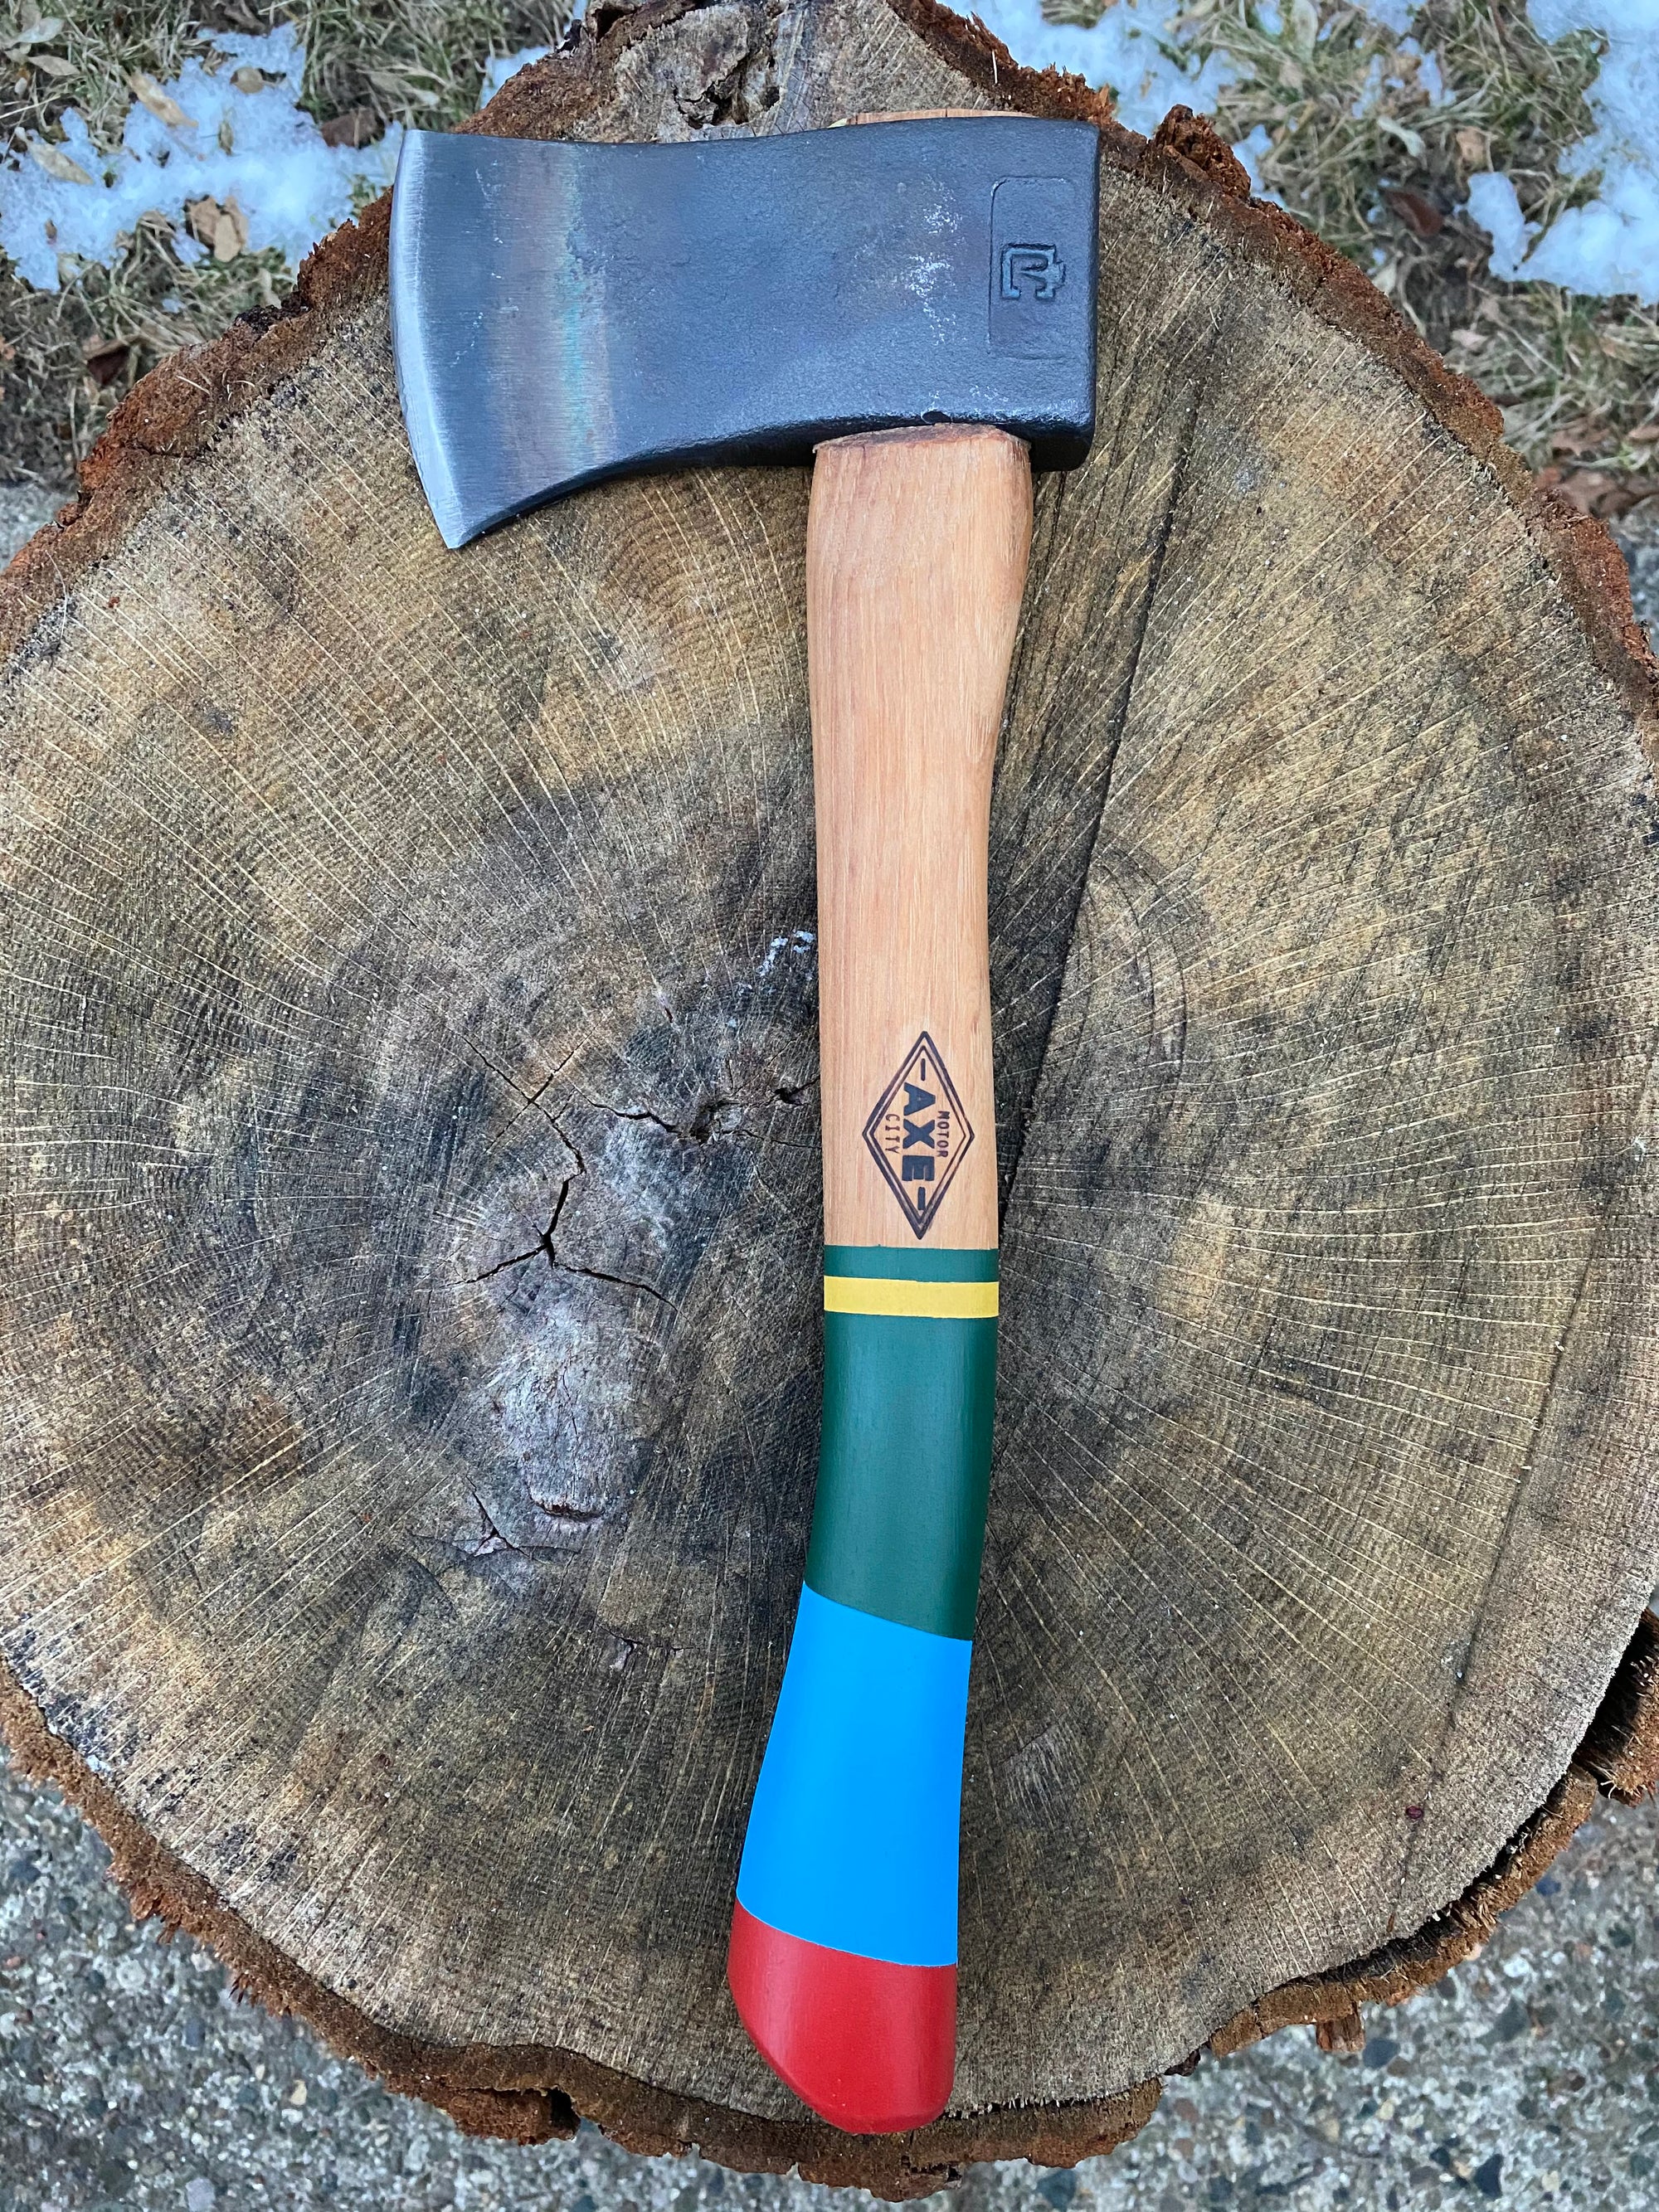 'The Up North' Hatchet or Axe